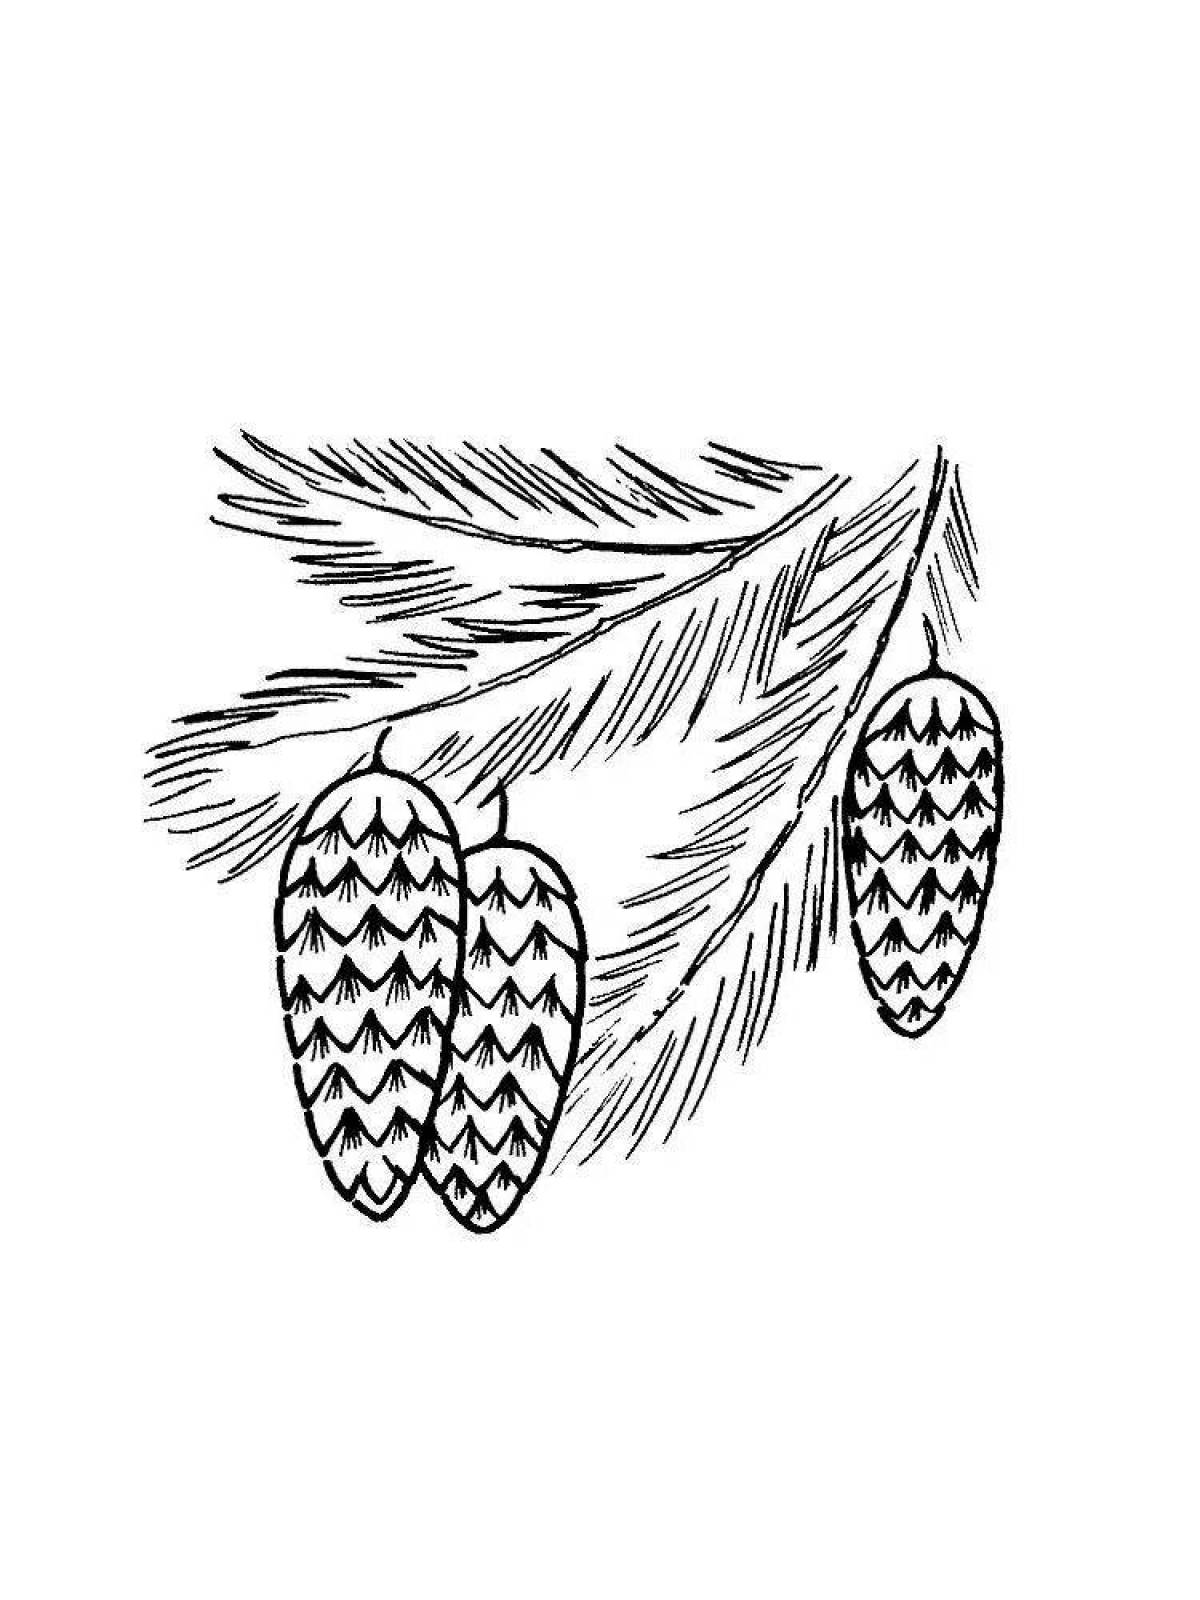 Coloring page cheerful sprig of spruce